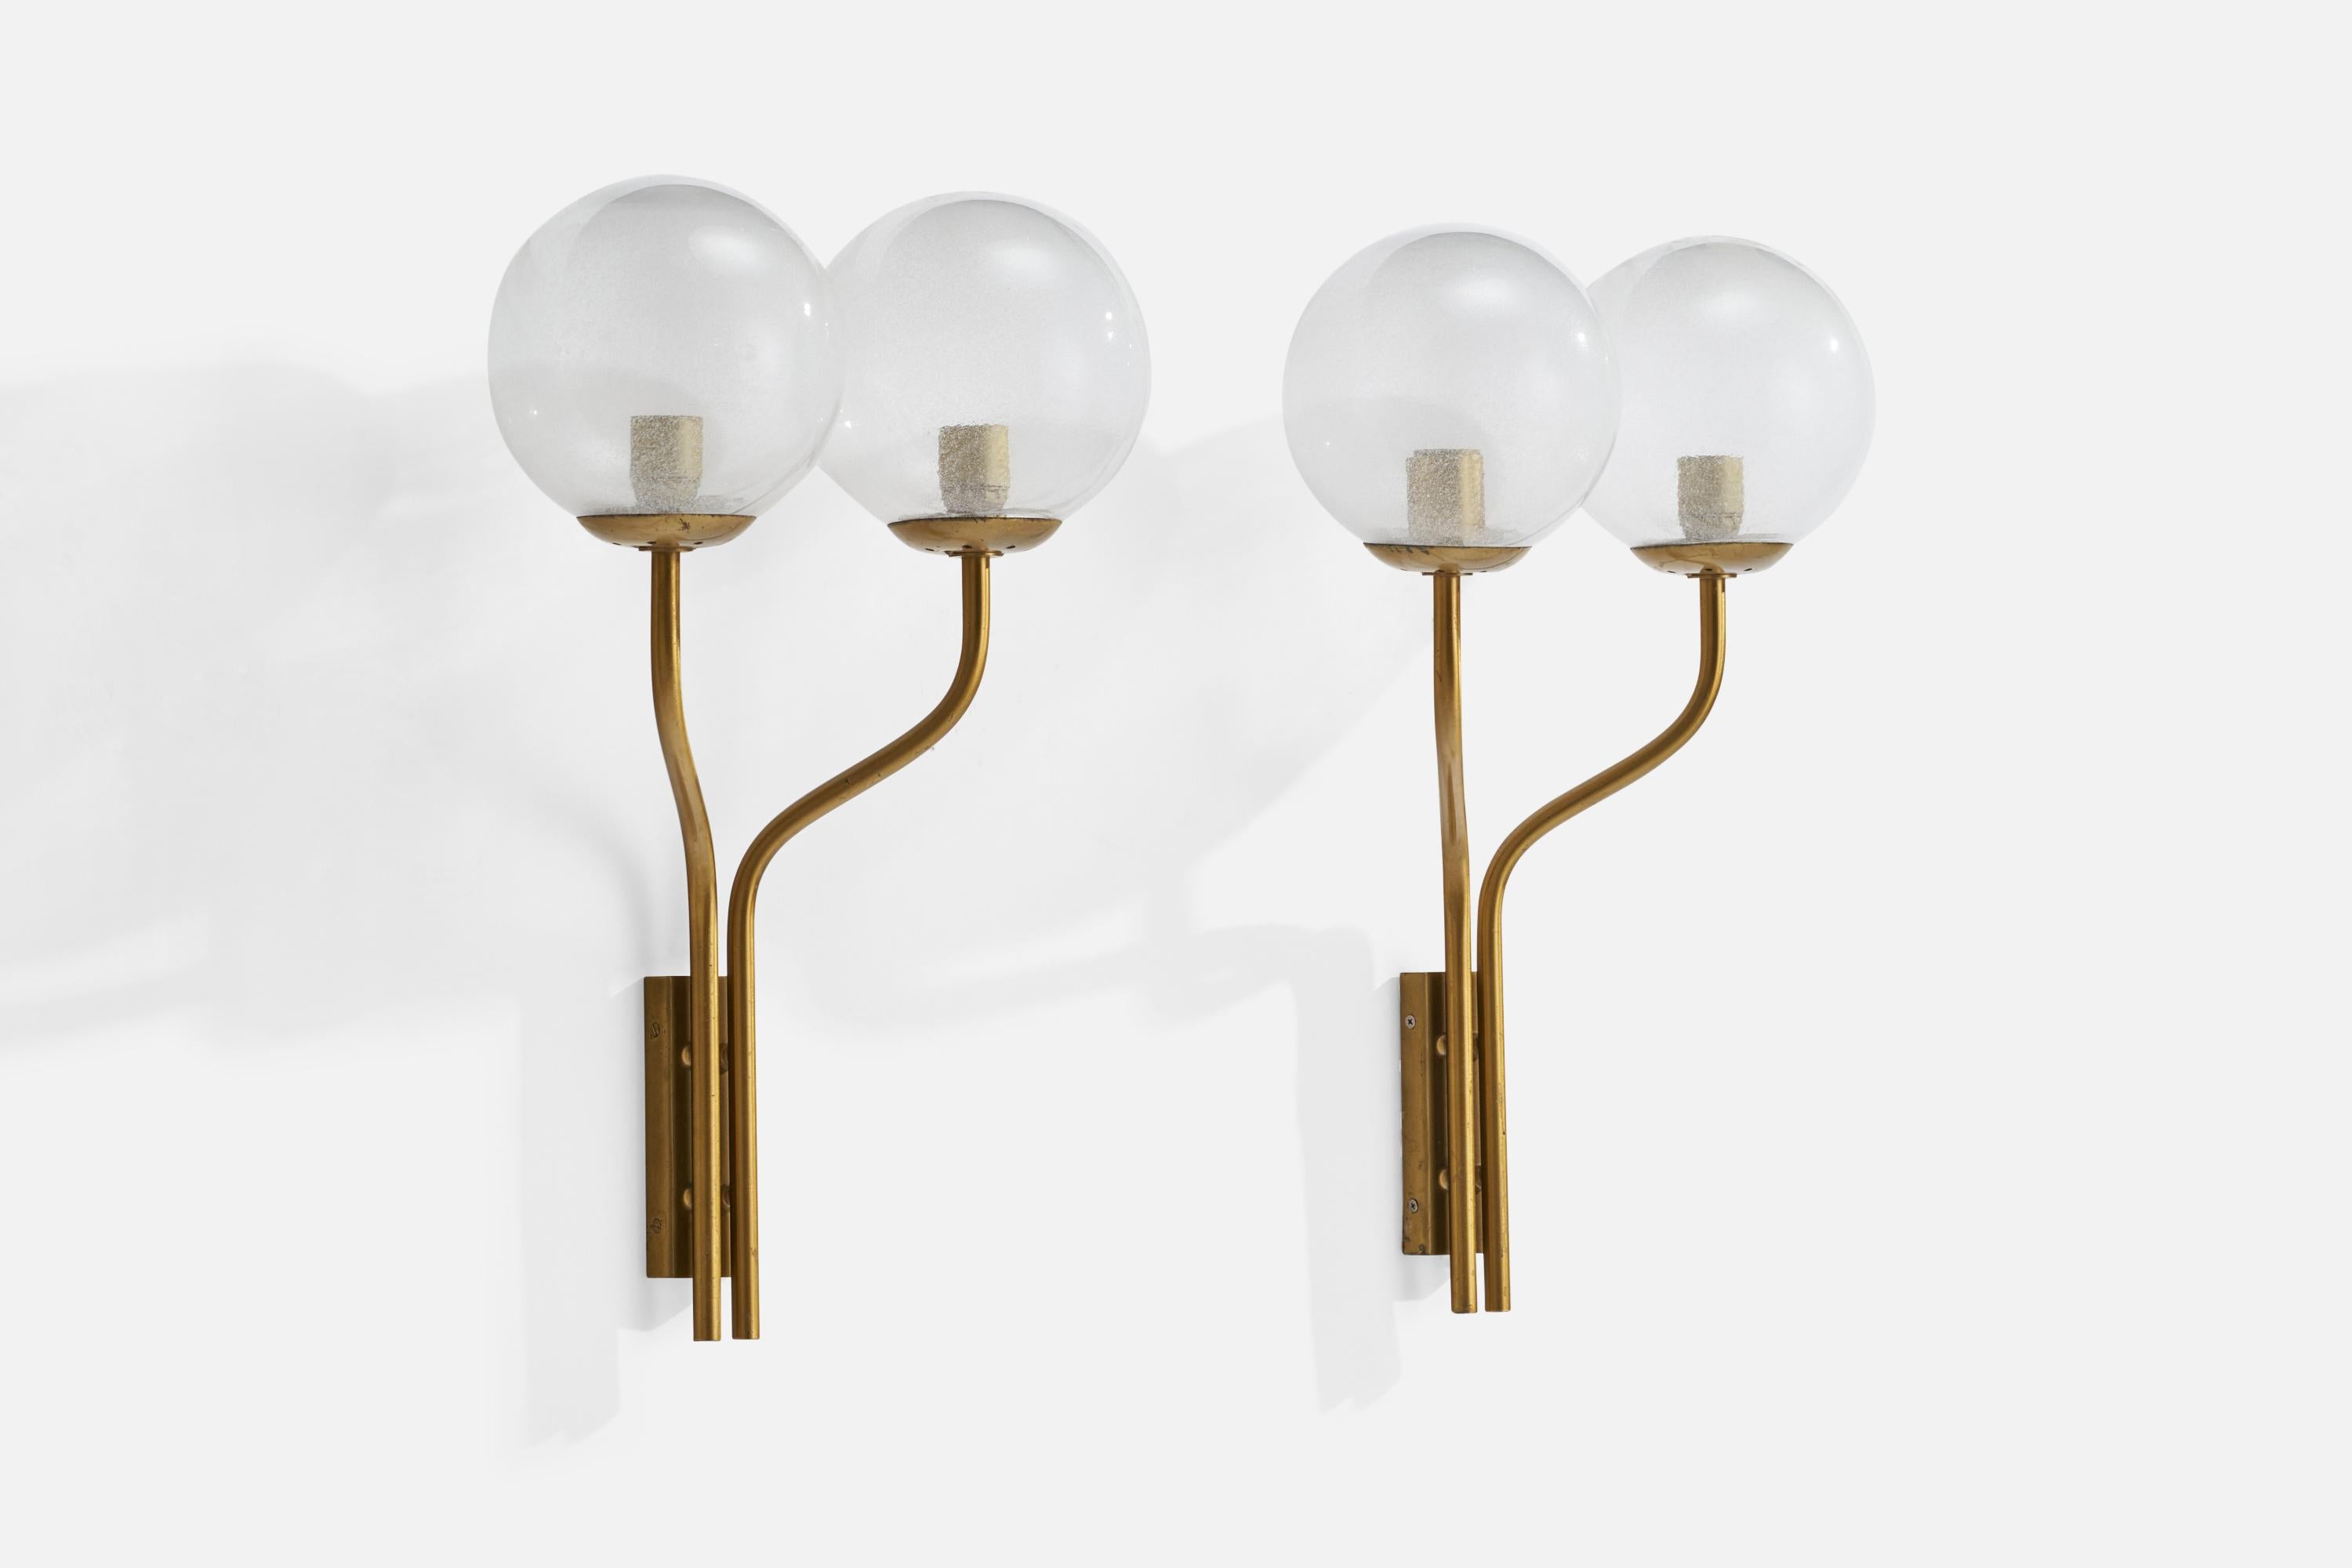 A pair of two-armed brass and glass wall lights designed and produced in Italy, 1950s.

Overall Dimensions (inches): 25.5” H x 16”  W x 8.87”  D
Back Plate Dimensions (inches): 6.62”  H x 2.37” W x .79” D
Bulb Specifications: E-26 Bulb
Number of